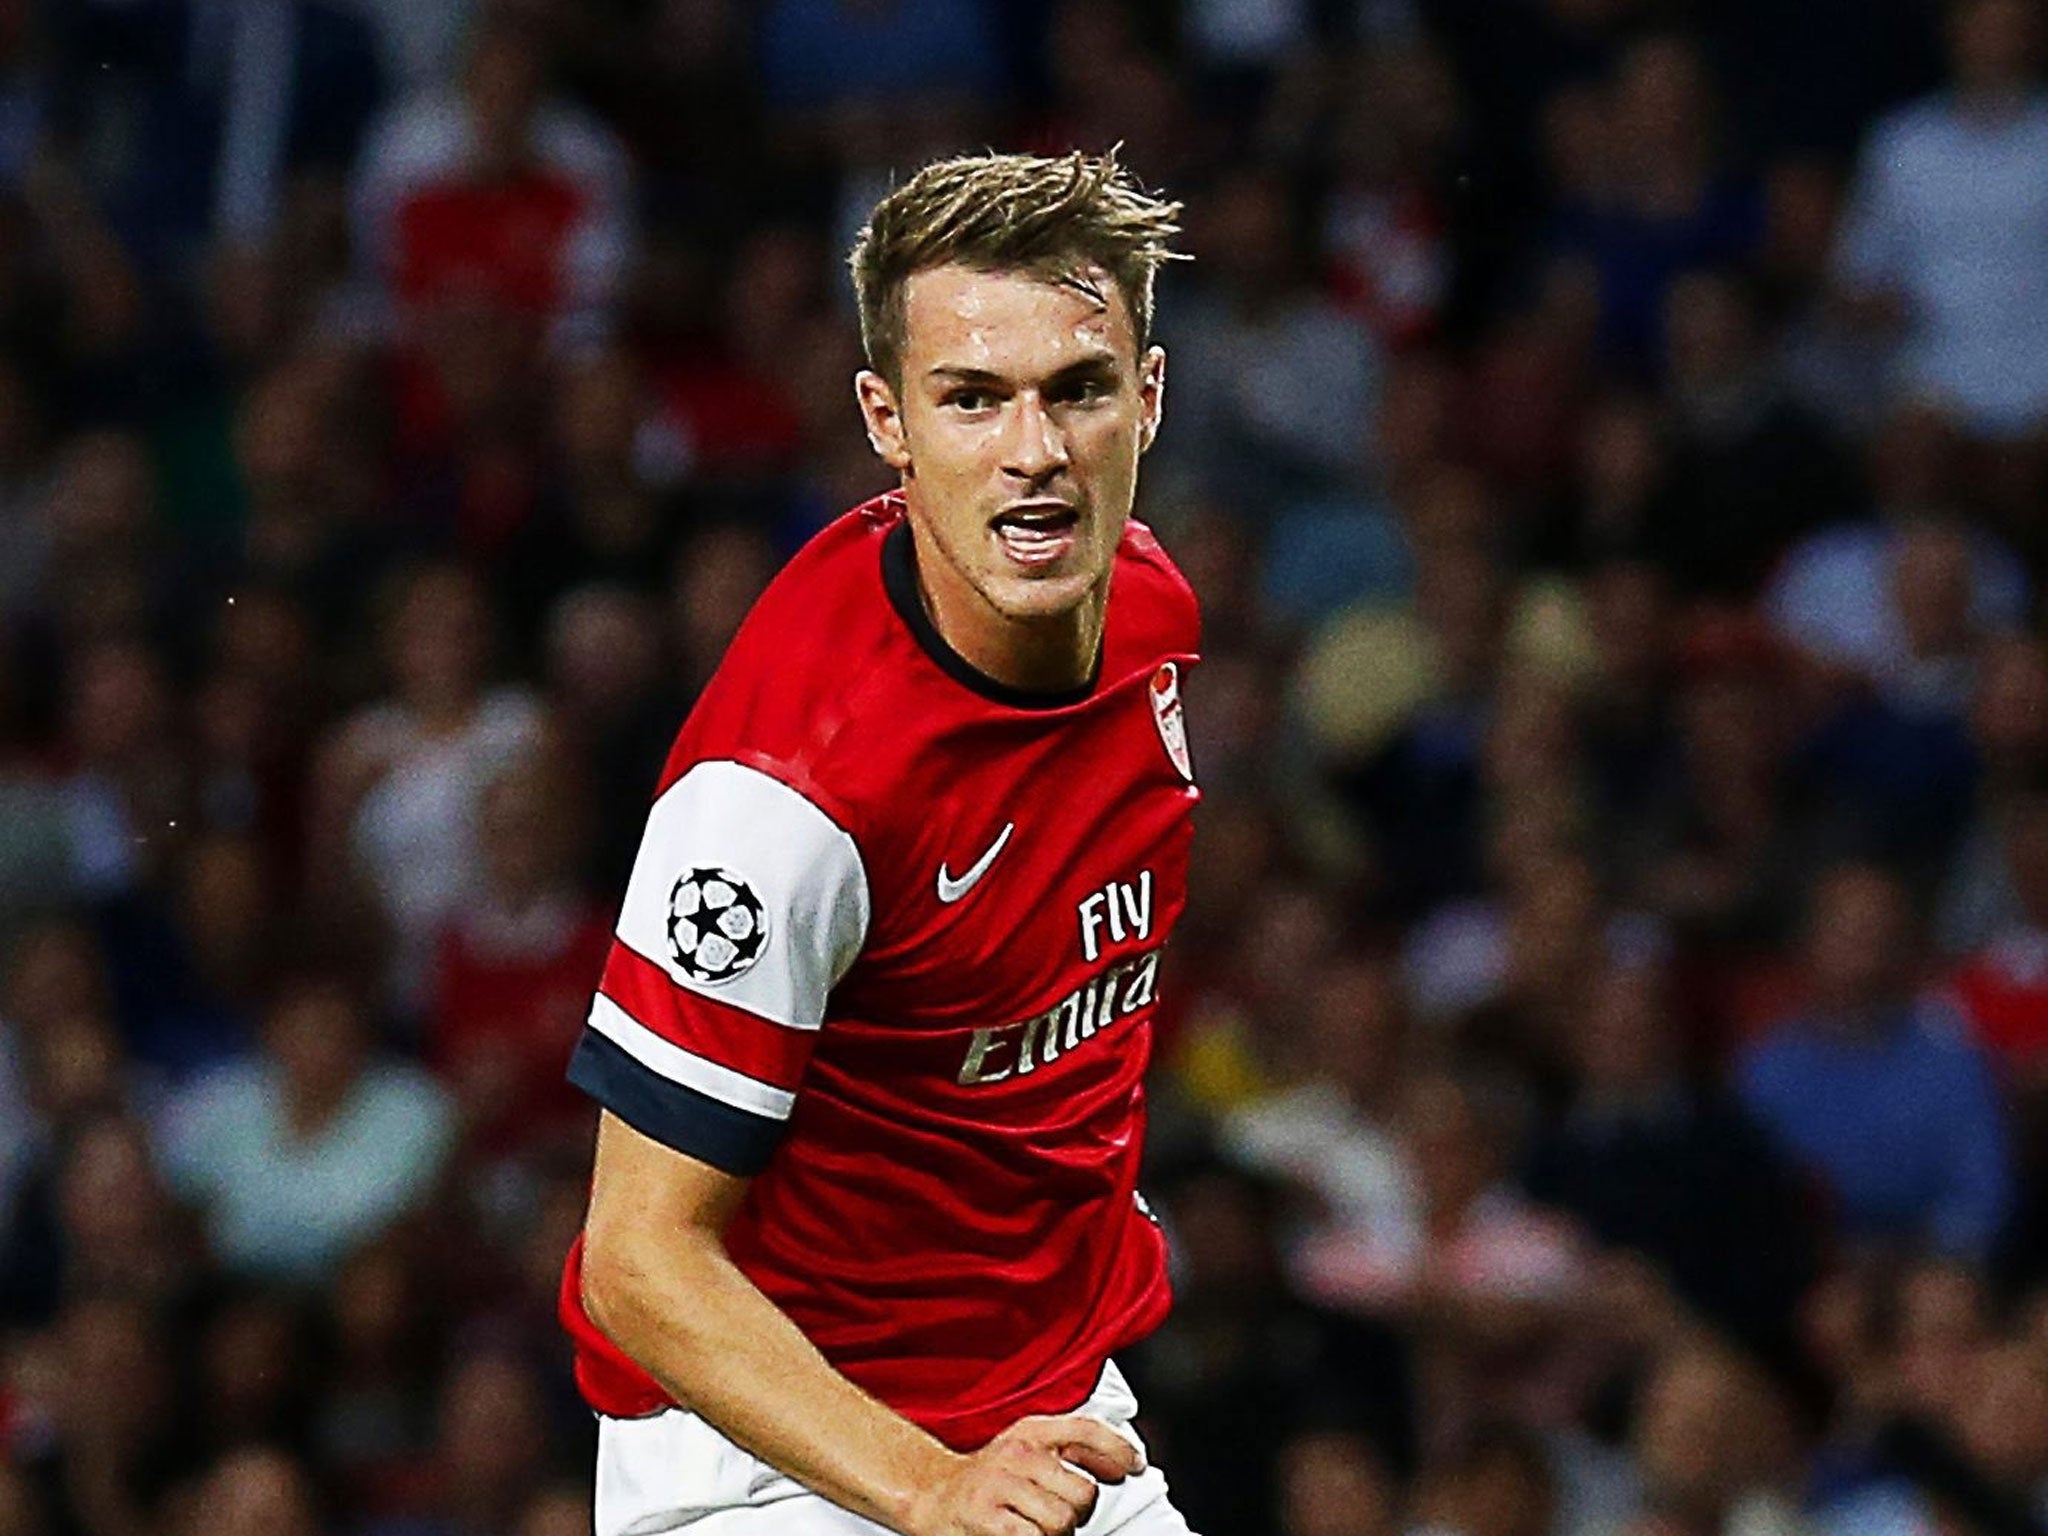 Aaron Ramsey scored twice to add to his goal in the first leg